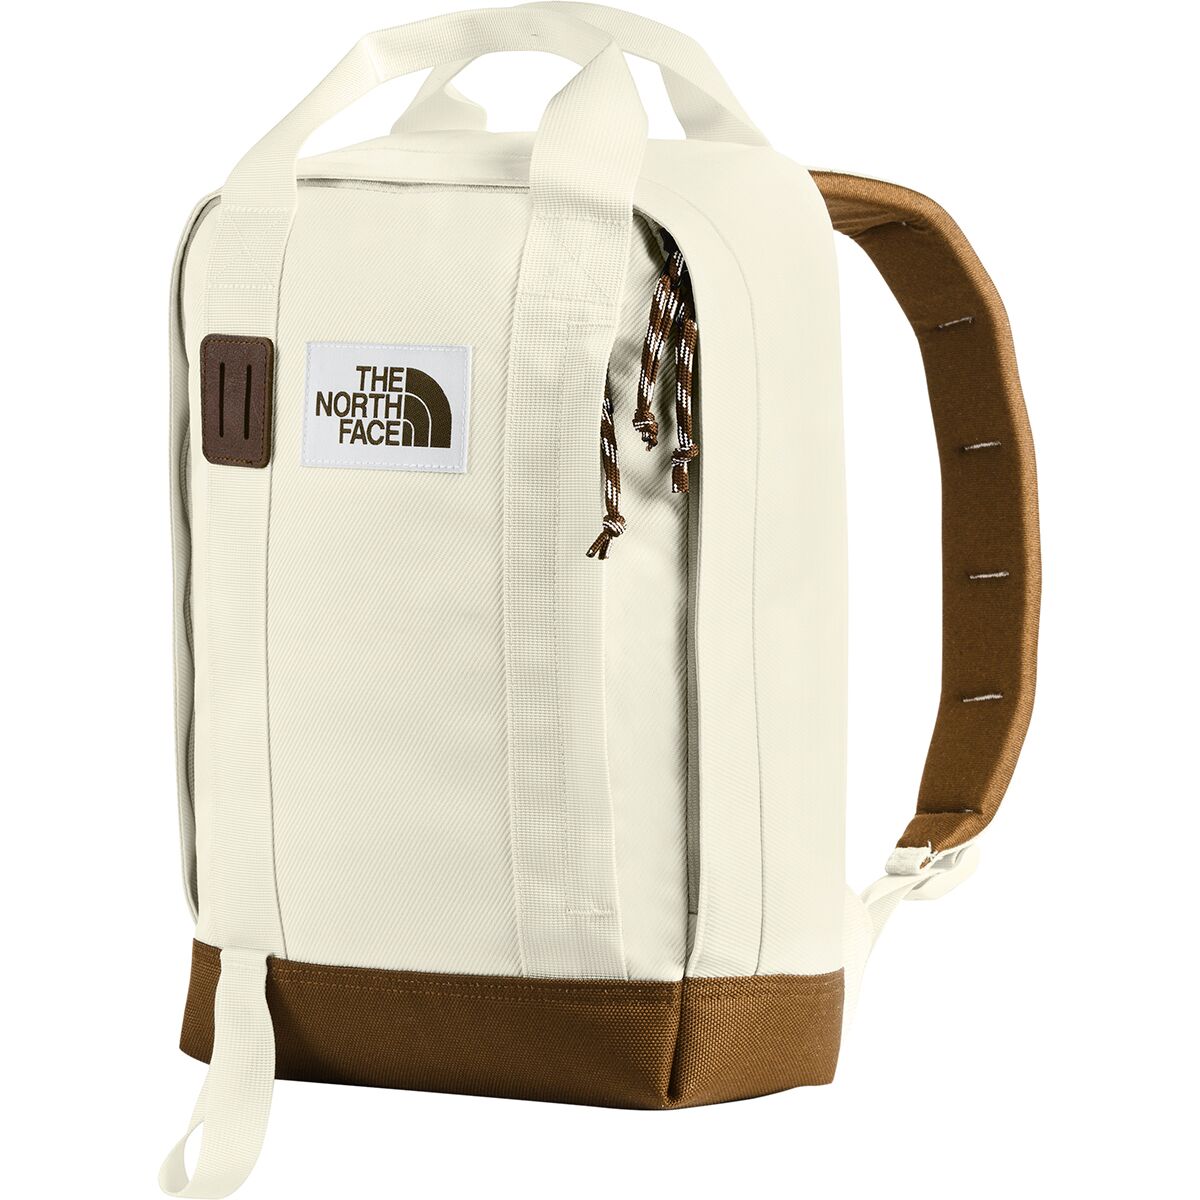 The North Face 14.5L Tote Pack | Backcountry.com